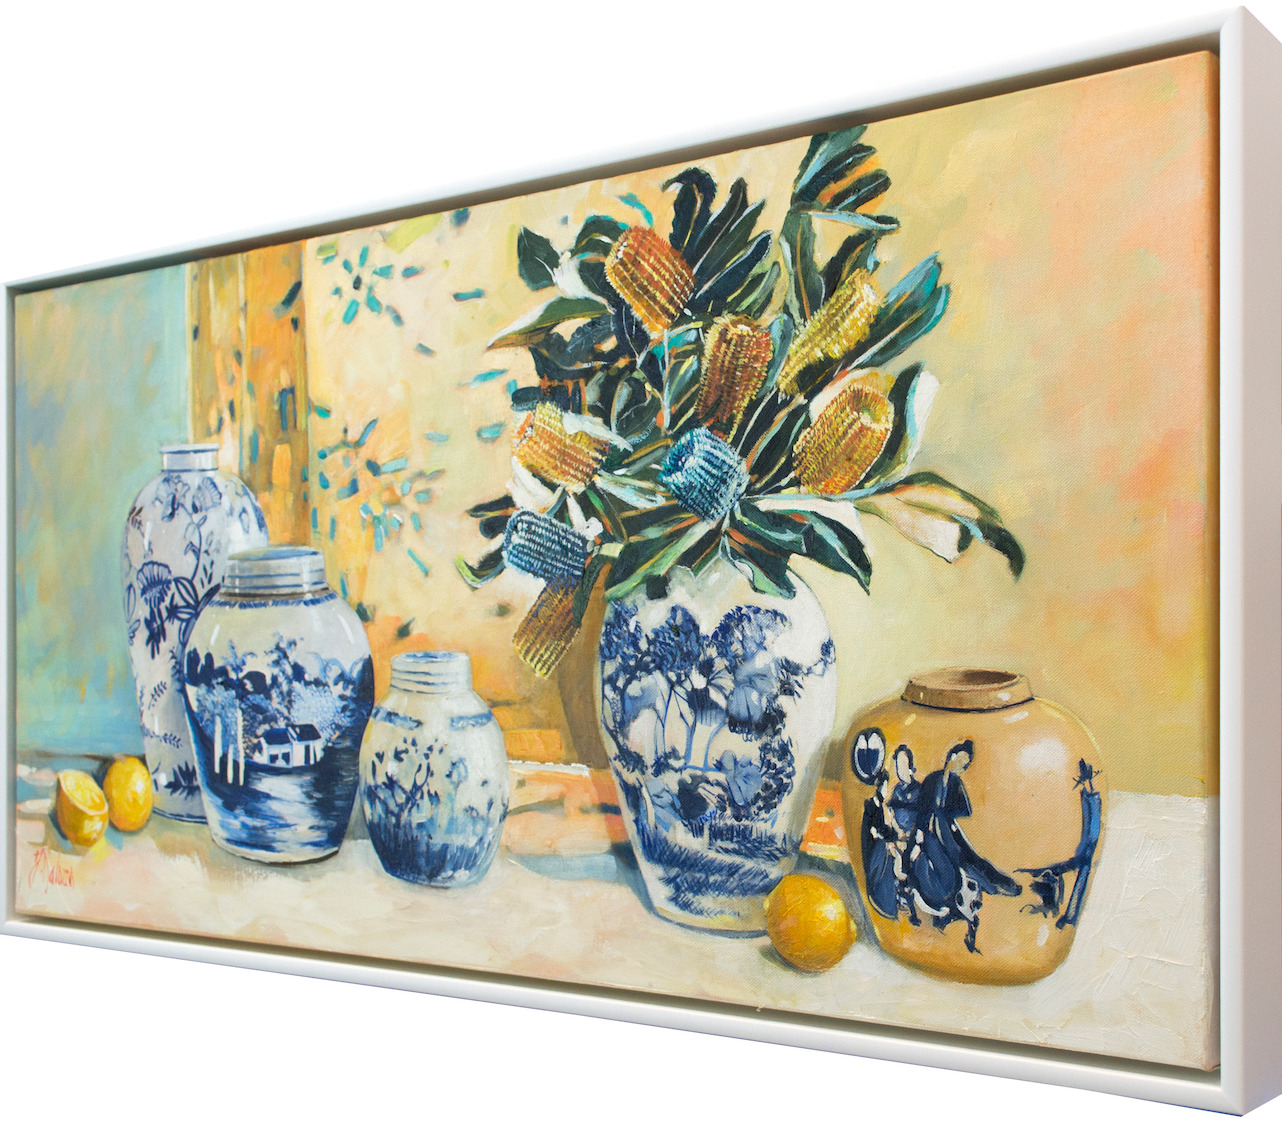 Framed Side View Of Still Life Painting "Banksia with China Vases" By Judith Dalozzo